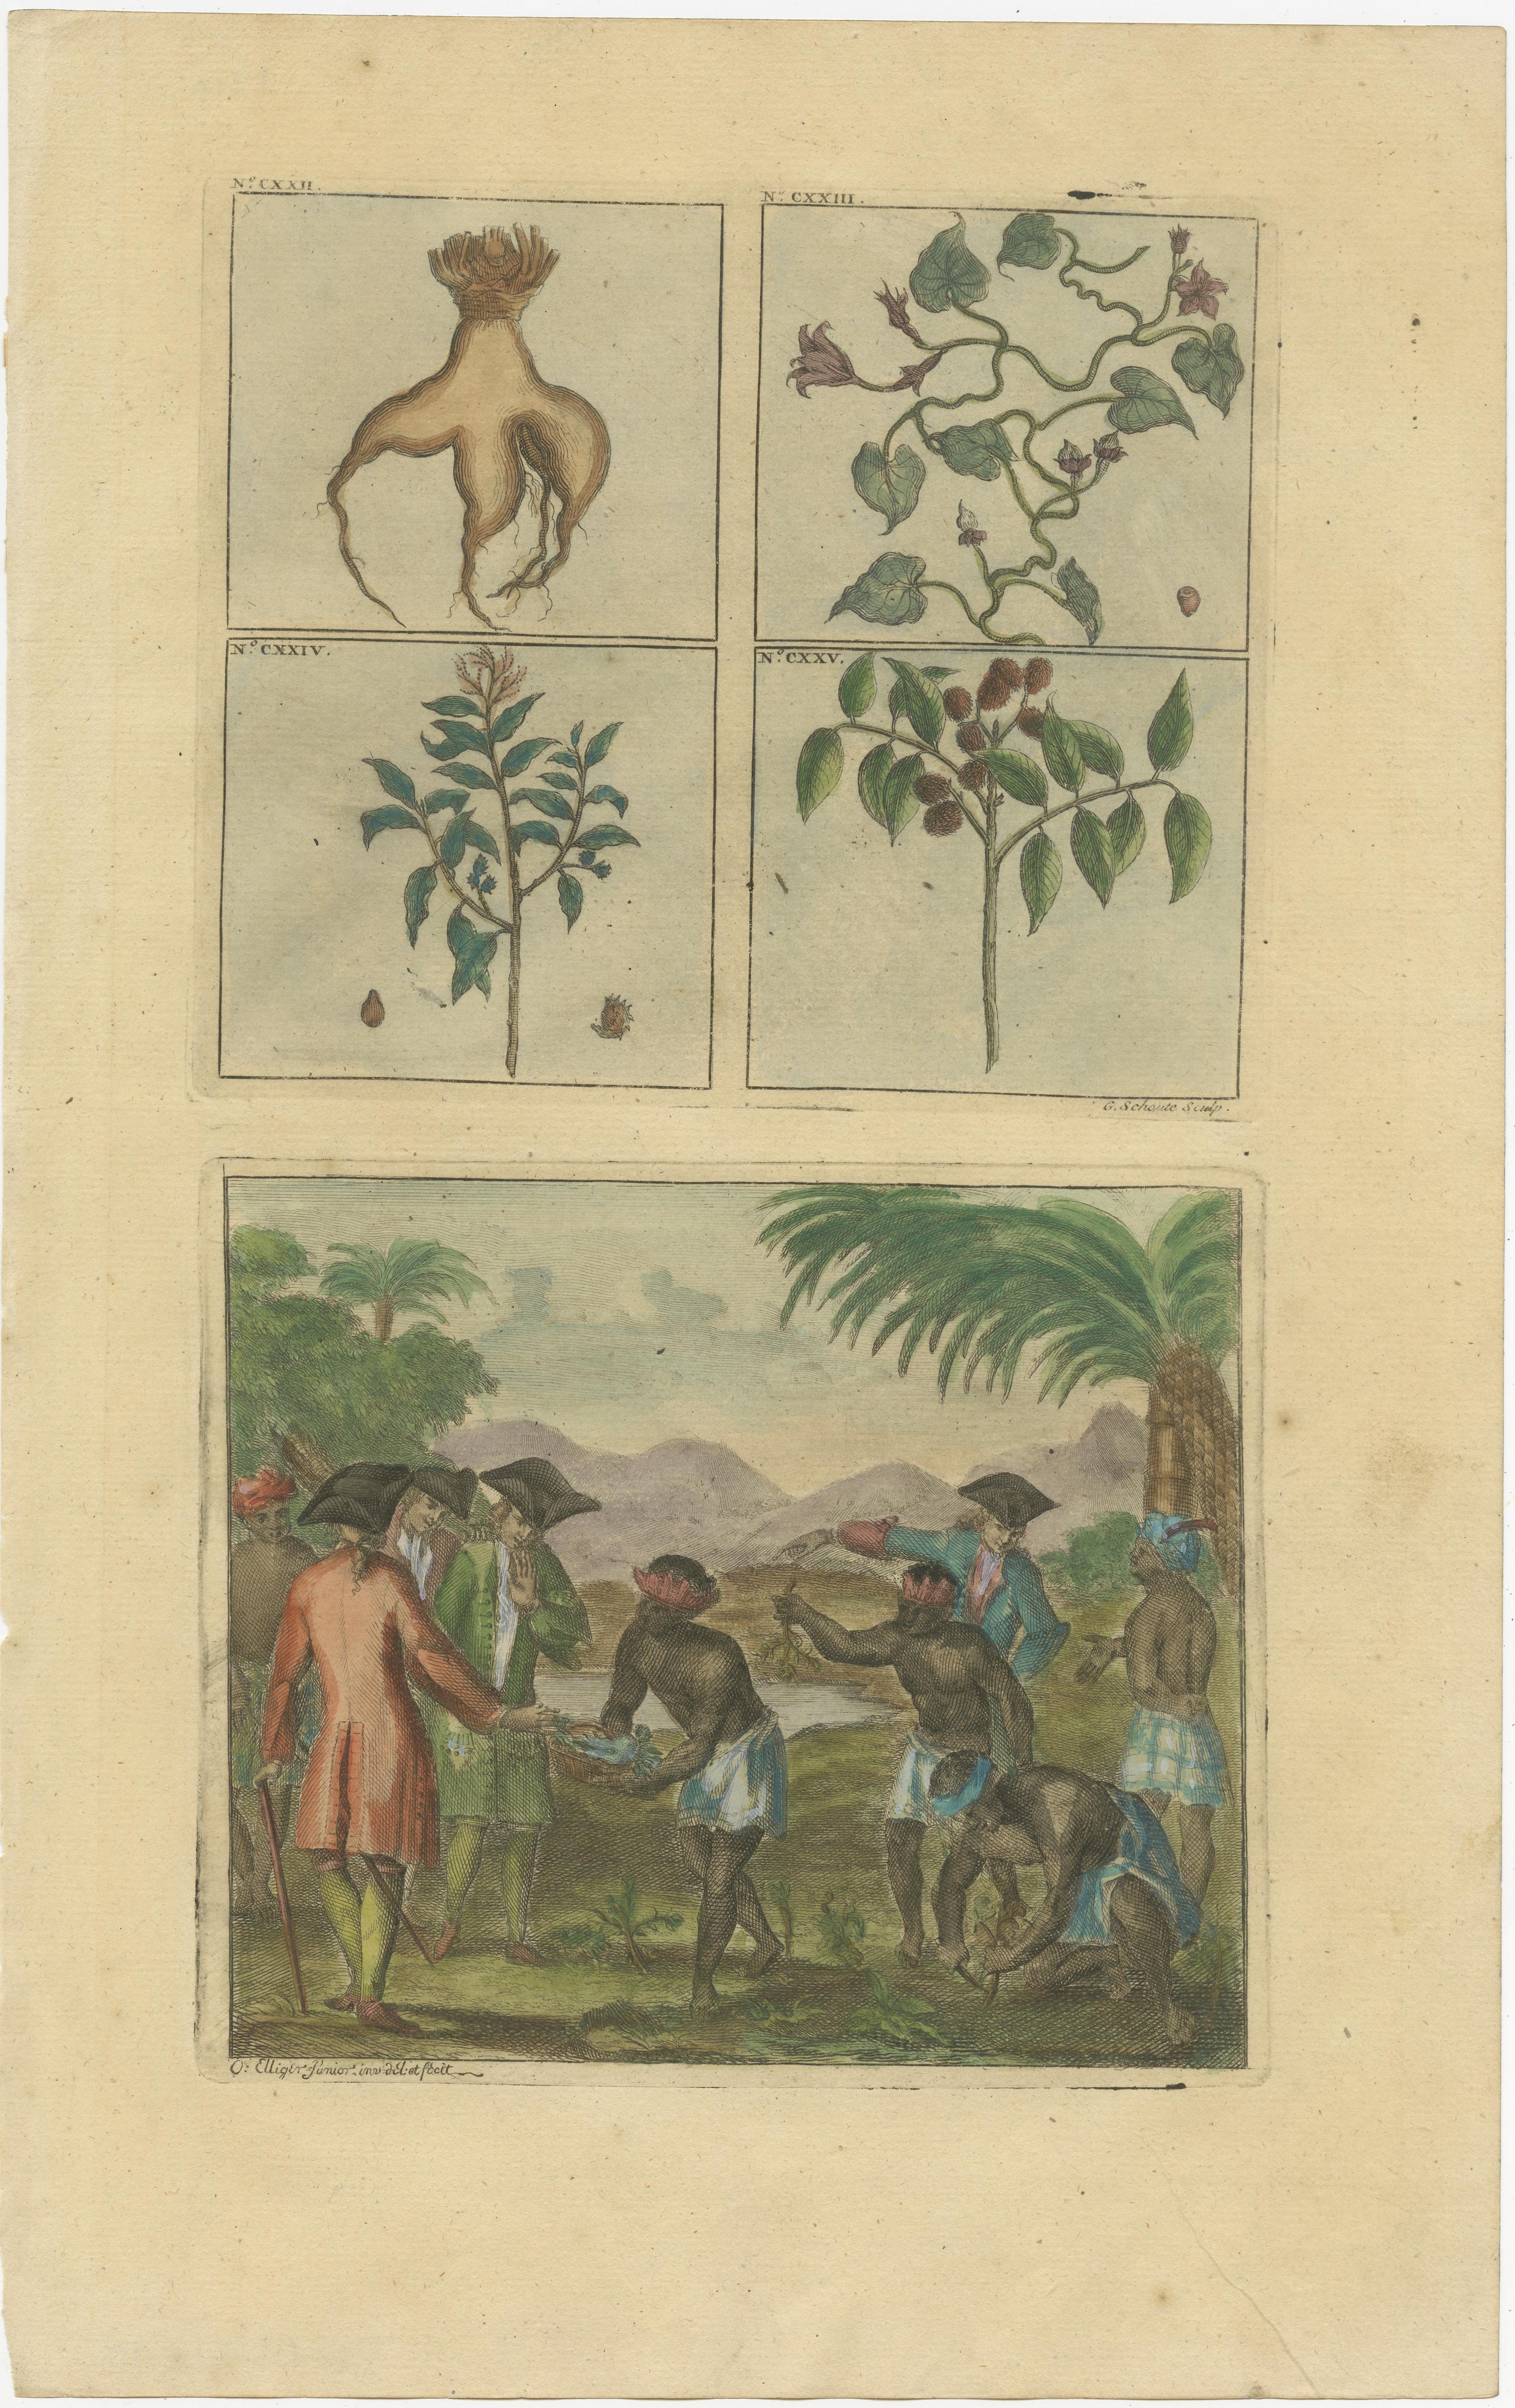 This original antique print depicts various plants and trees from South East Asia, incuding ginger. Below Dutch VOC men with Indonesian natives. This print originates from 'Oud en Nieuw Oost-Indiën' by F. Valentijn.

François Valentyn or Valentijn